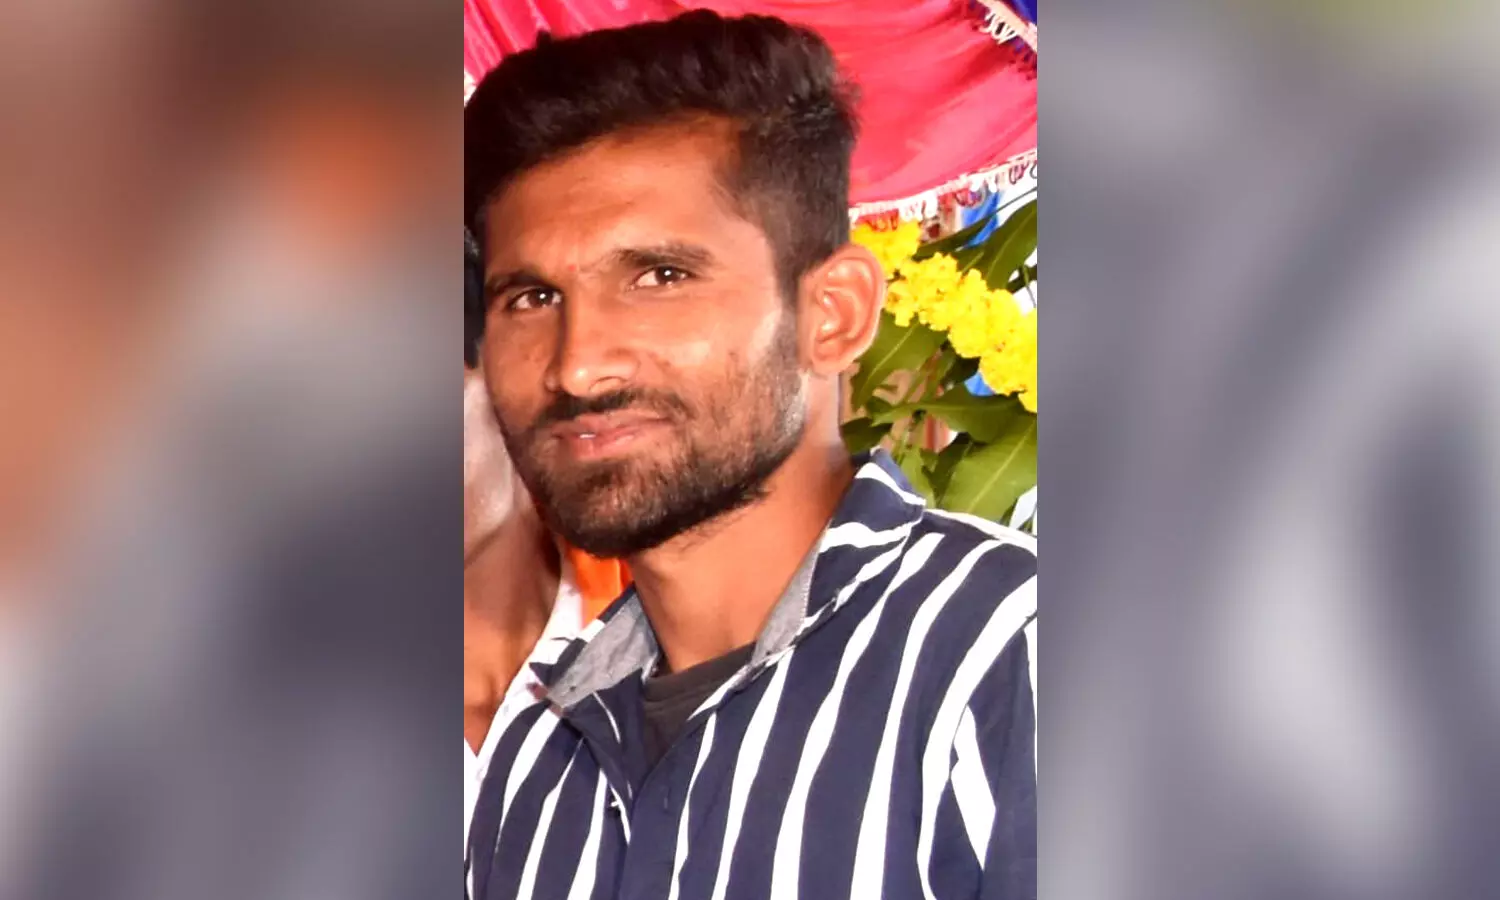 Congress workers beat BRS activist to death in dispute over CC road works